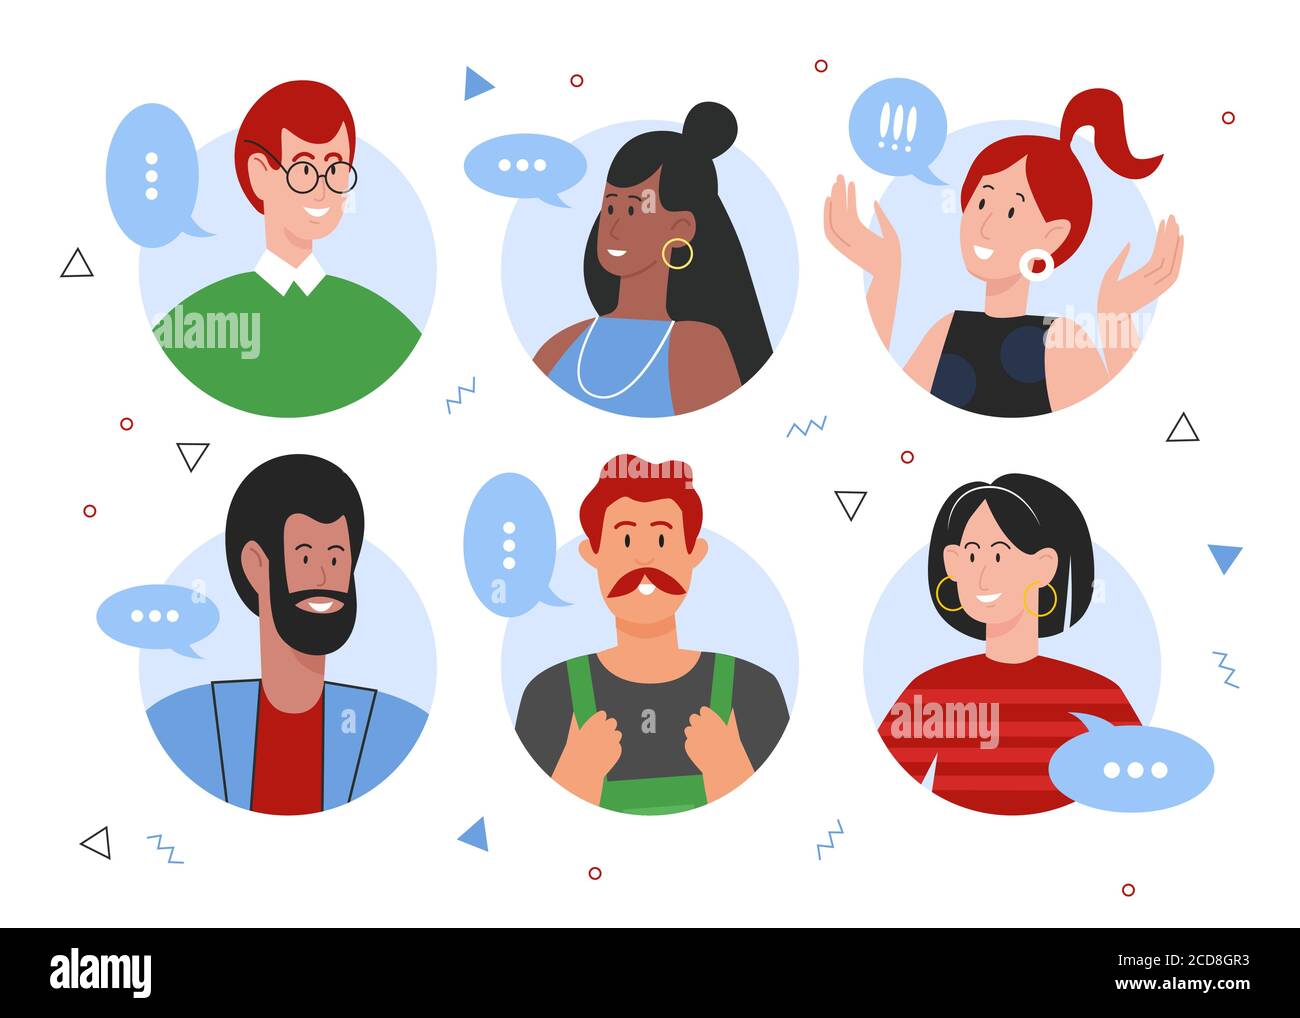 People speaking flat vector illustration set. Cartoon circle portrait of diverse happy characters speak and communicate in online conversation, man woman speaker avatar for messenger isolated on white Stock Vector